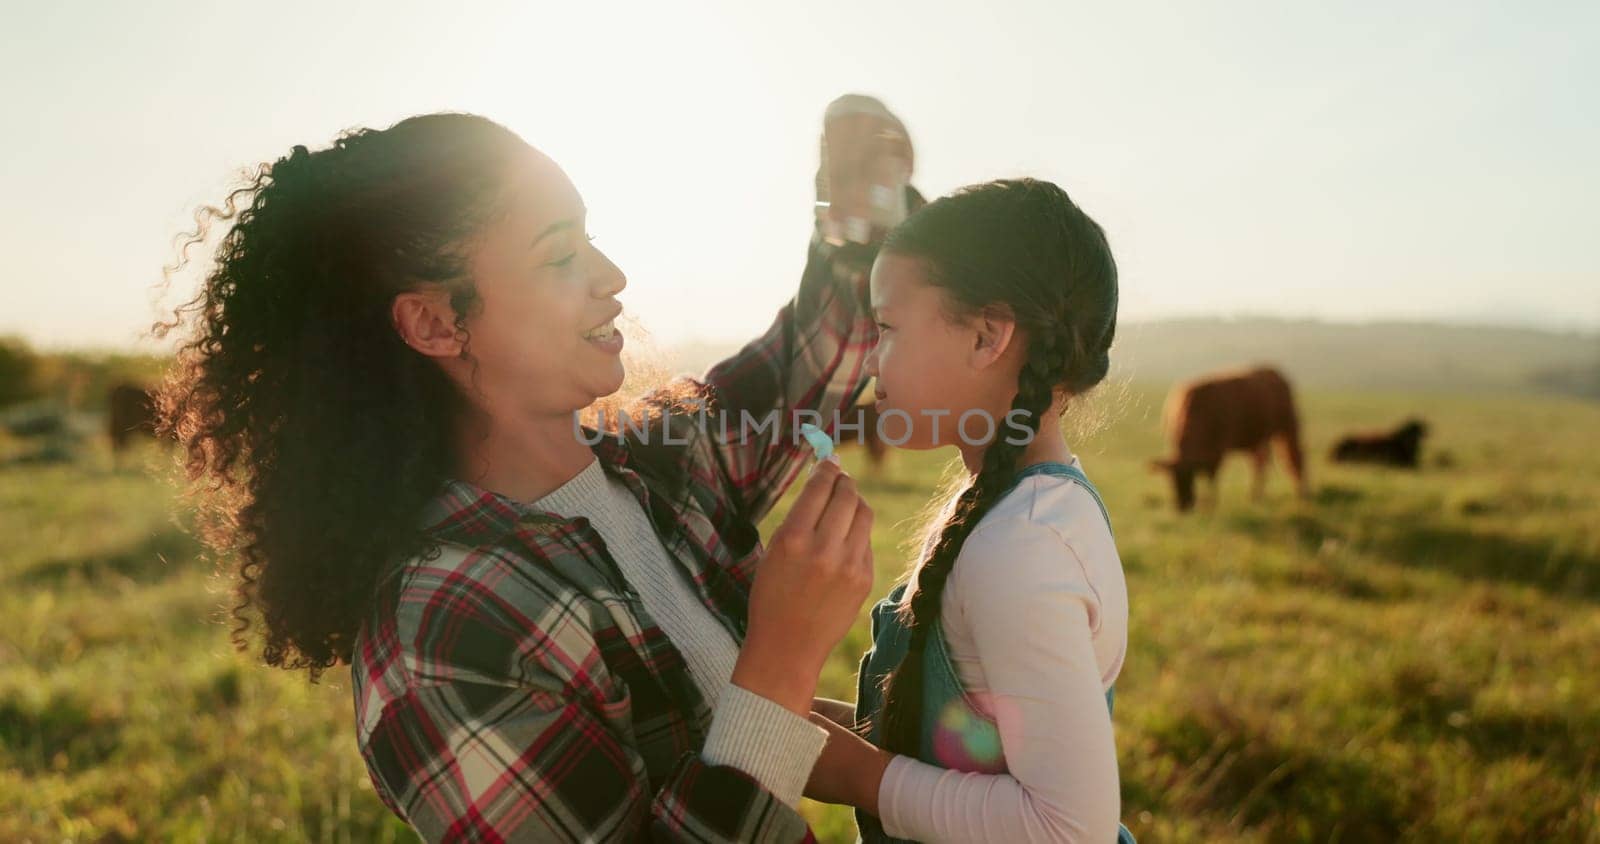 Cows, farm and mother bonding with child, fixing hair clip and standing on field. Farming, farm animals and mom with daughter in the morning enjoying sunrise in countryside showing love and affection.